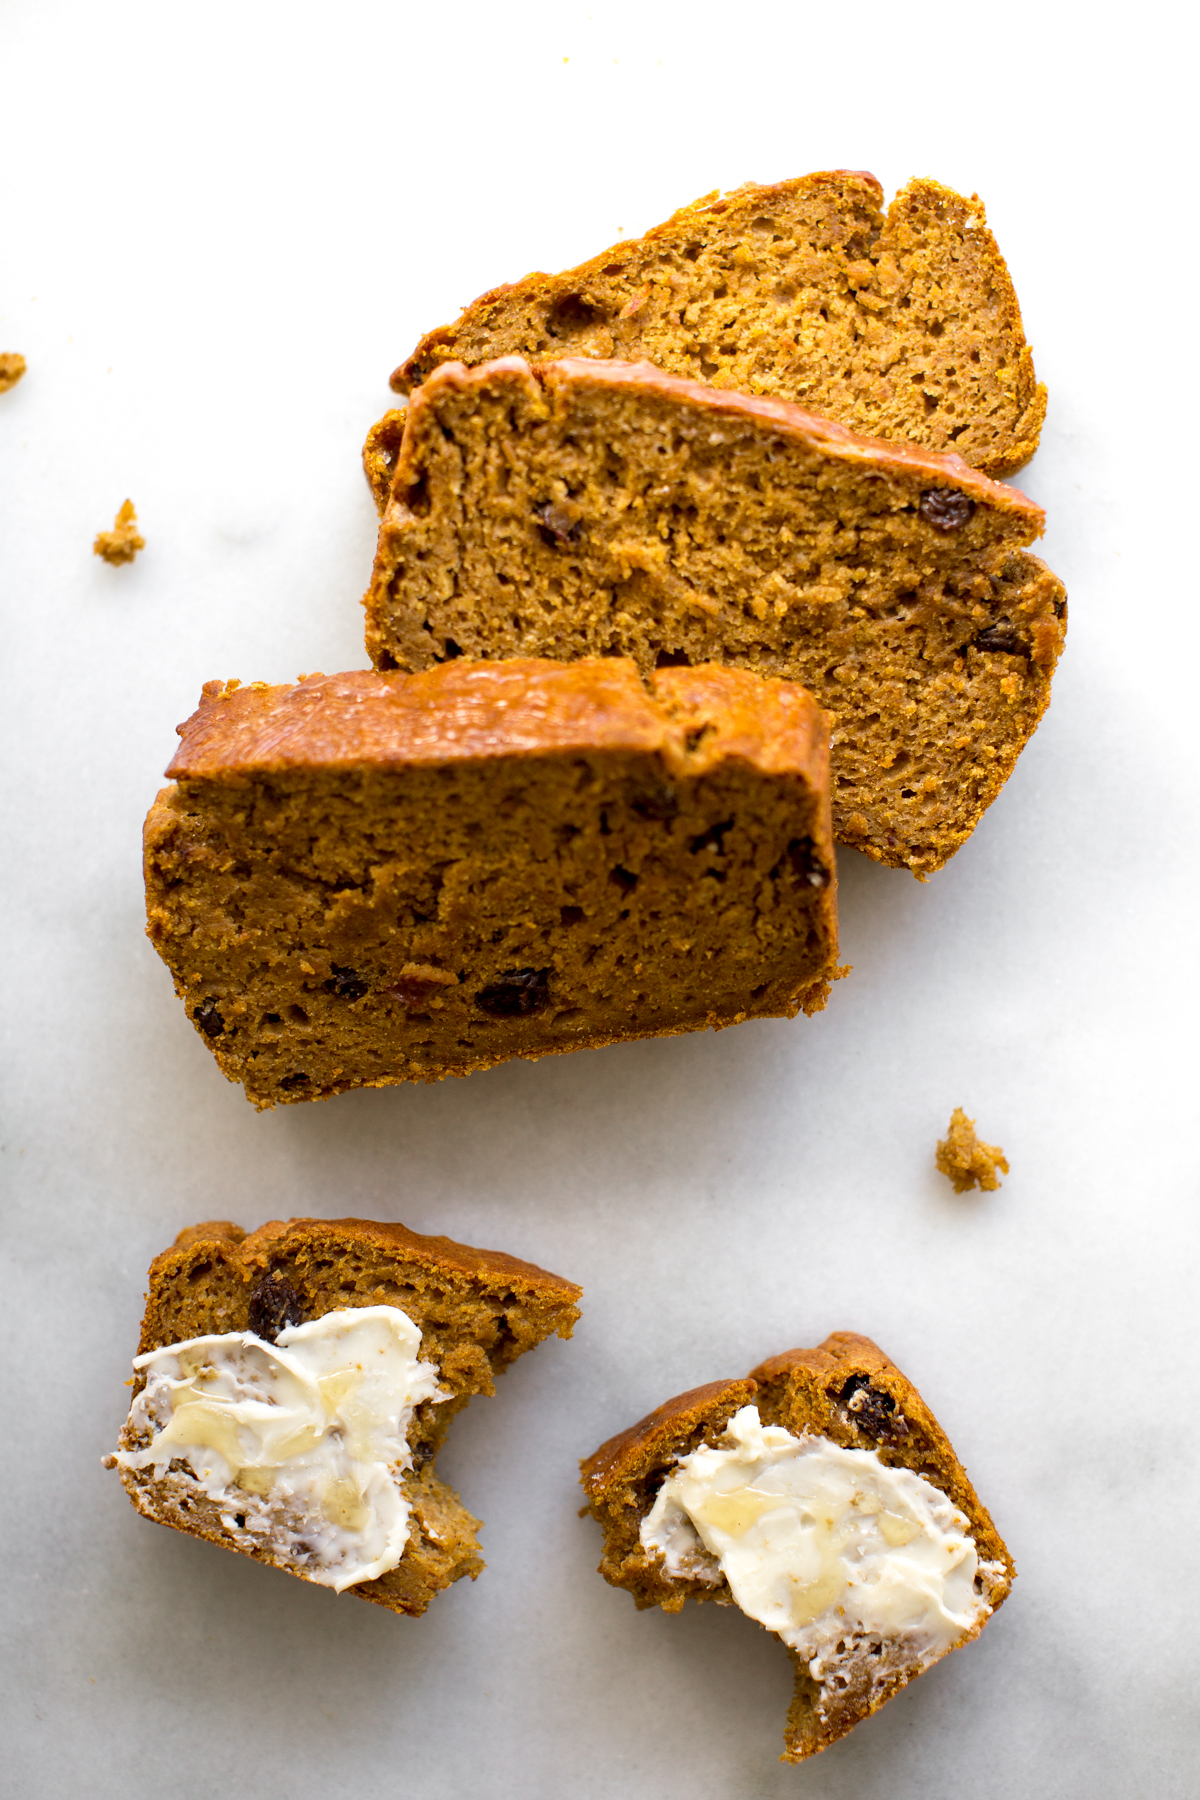 Slices of pumpkin bread smeared with butter and a drizzle of honey